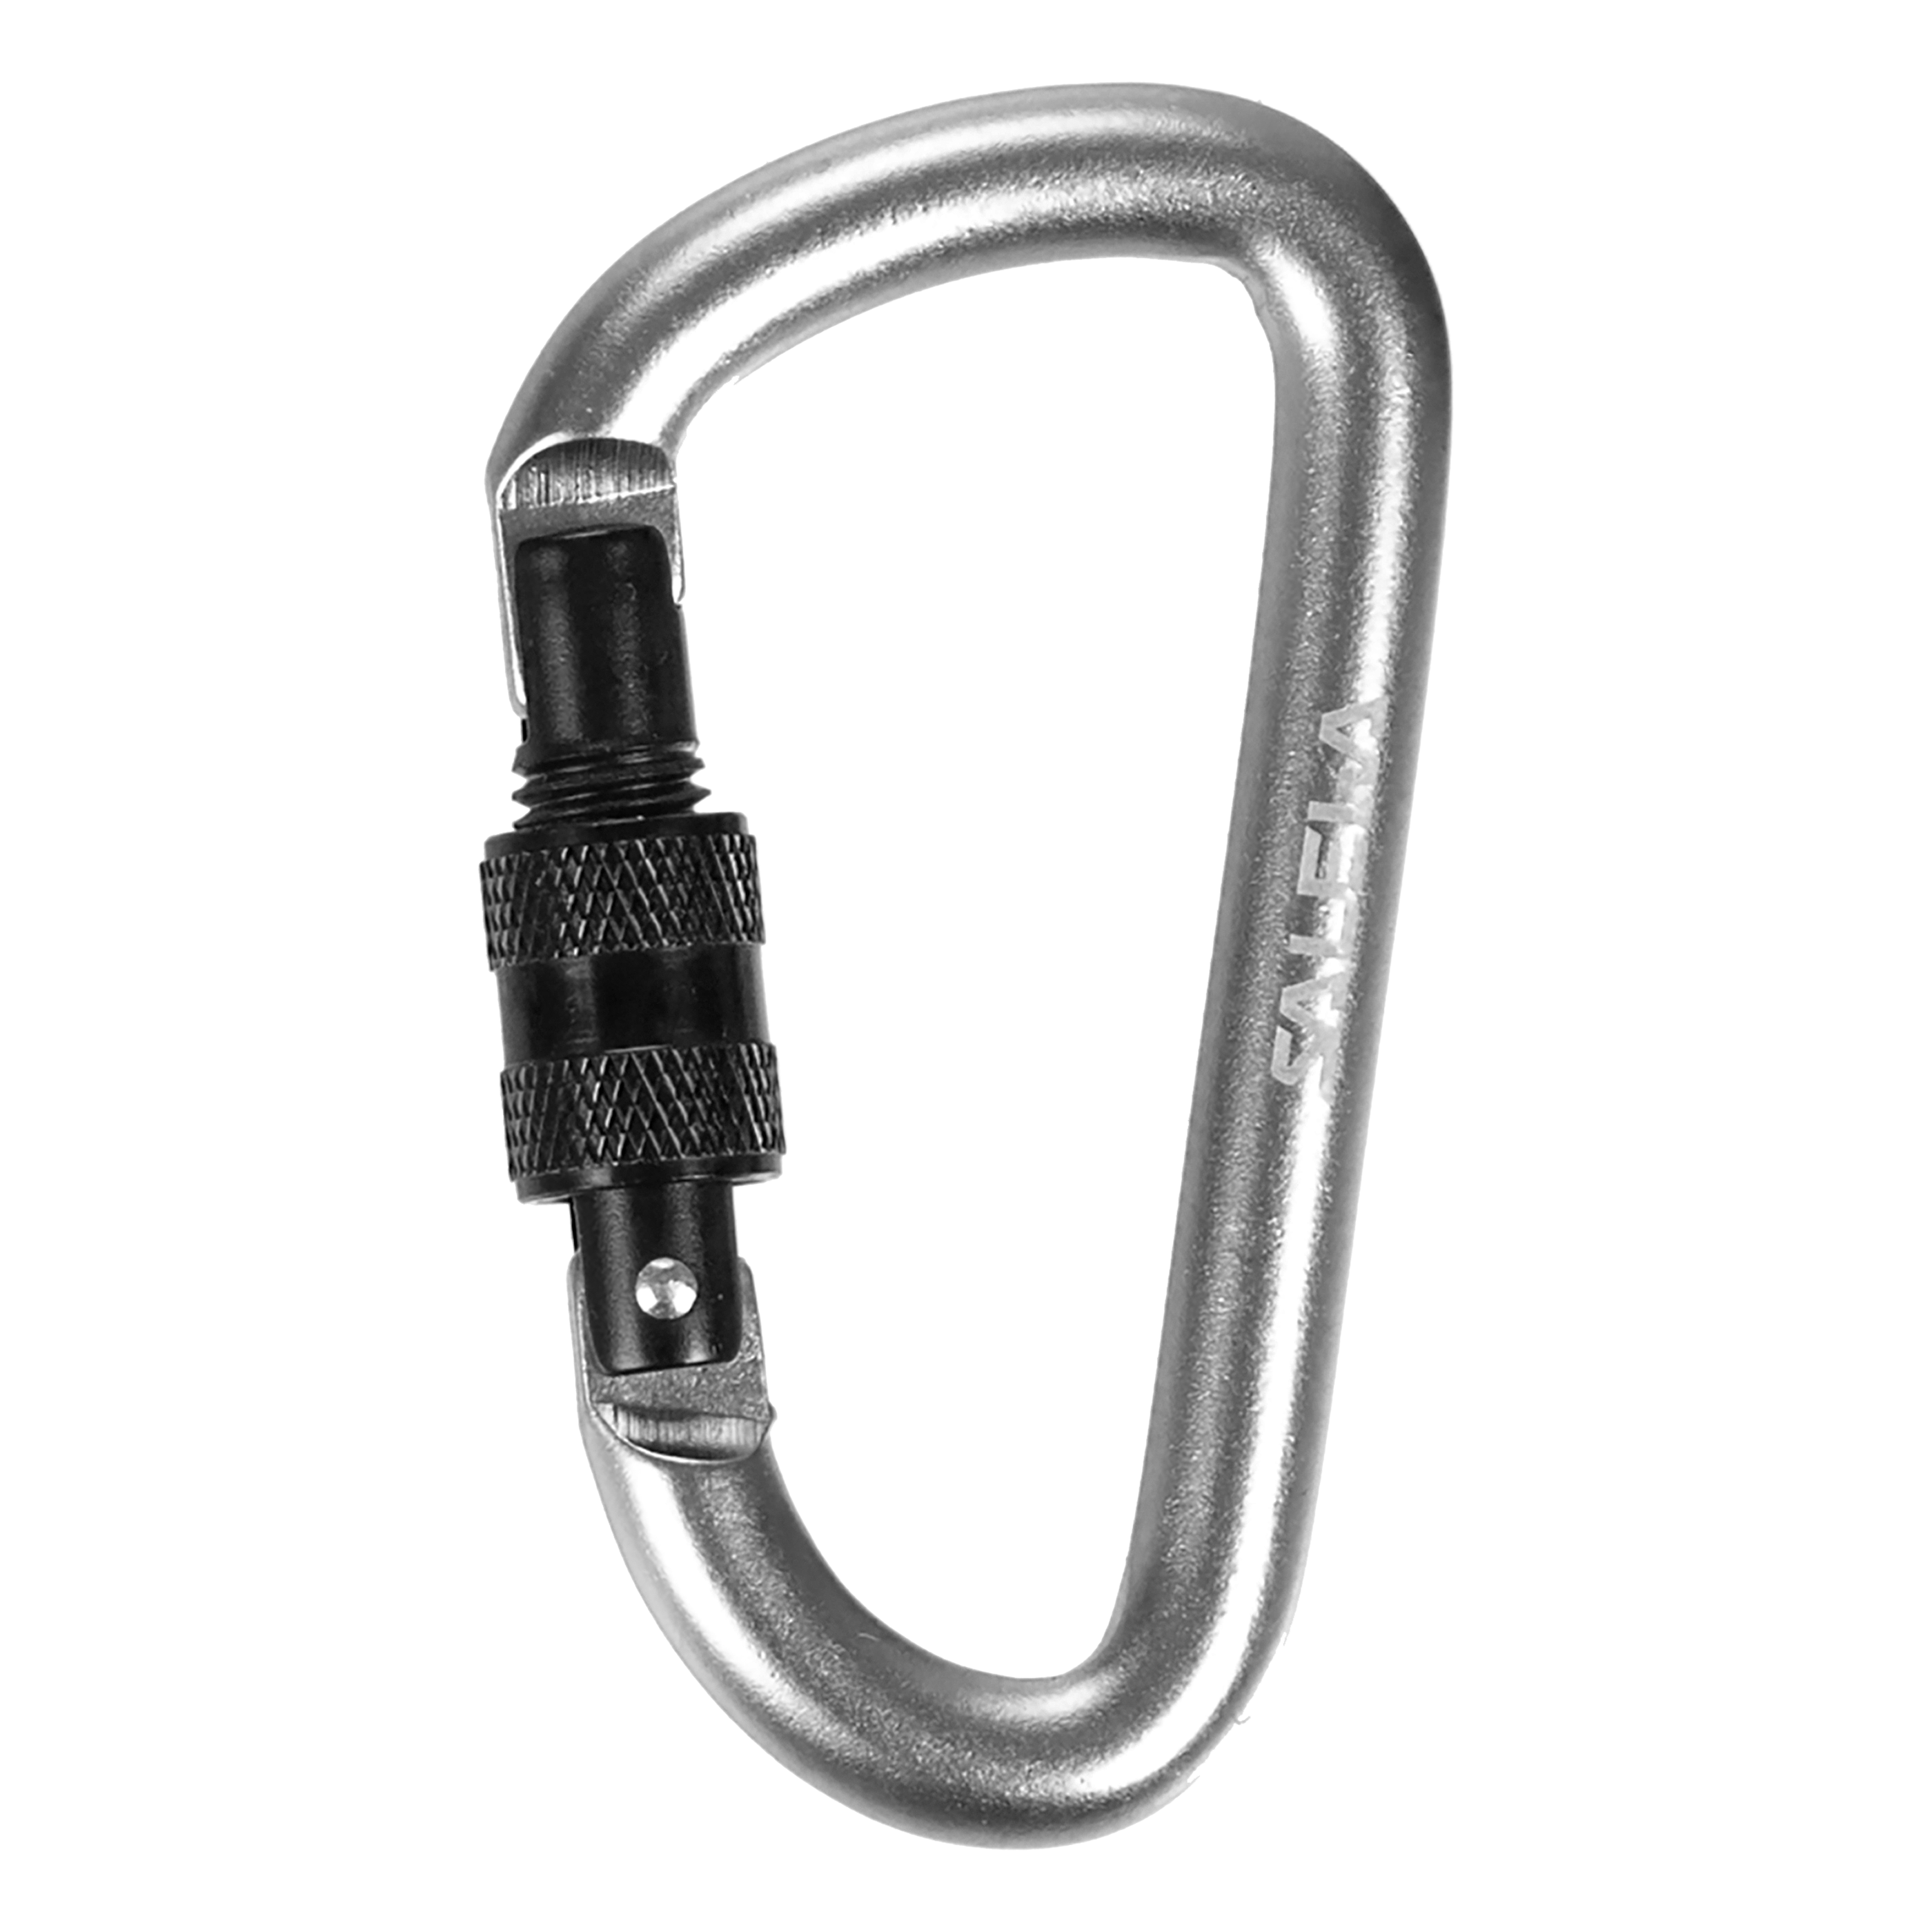 D-Shape carabiner with screw